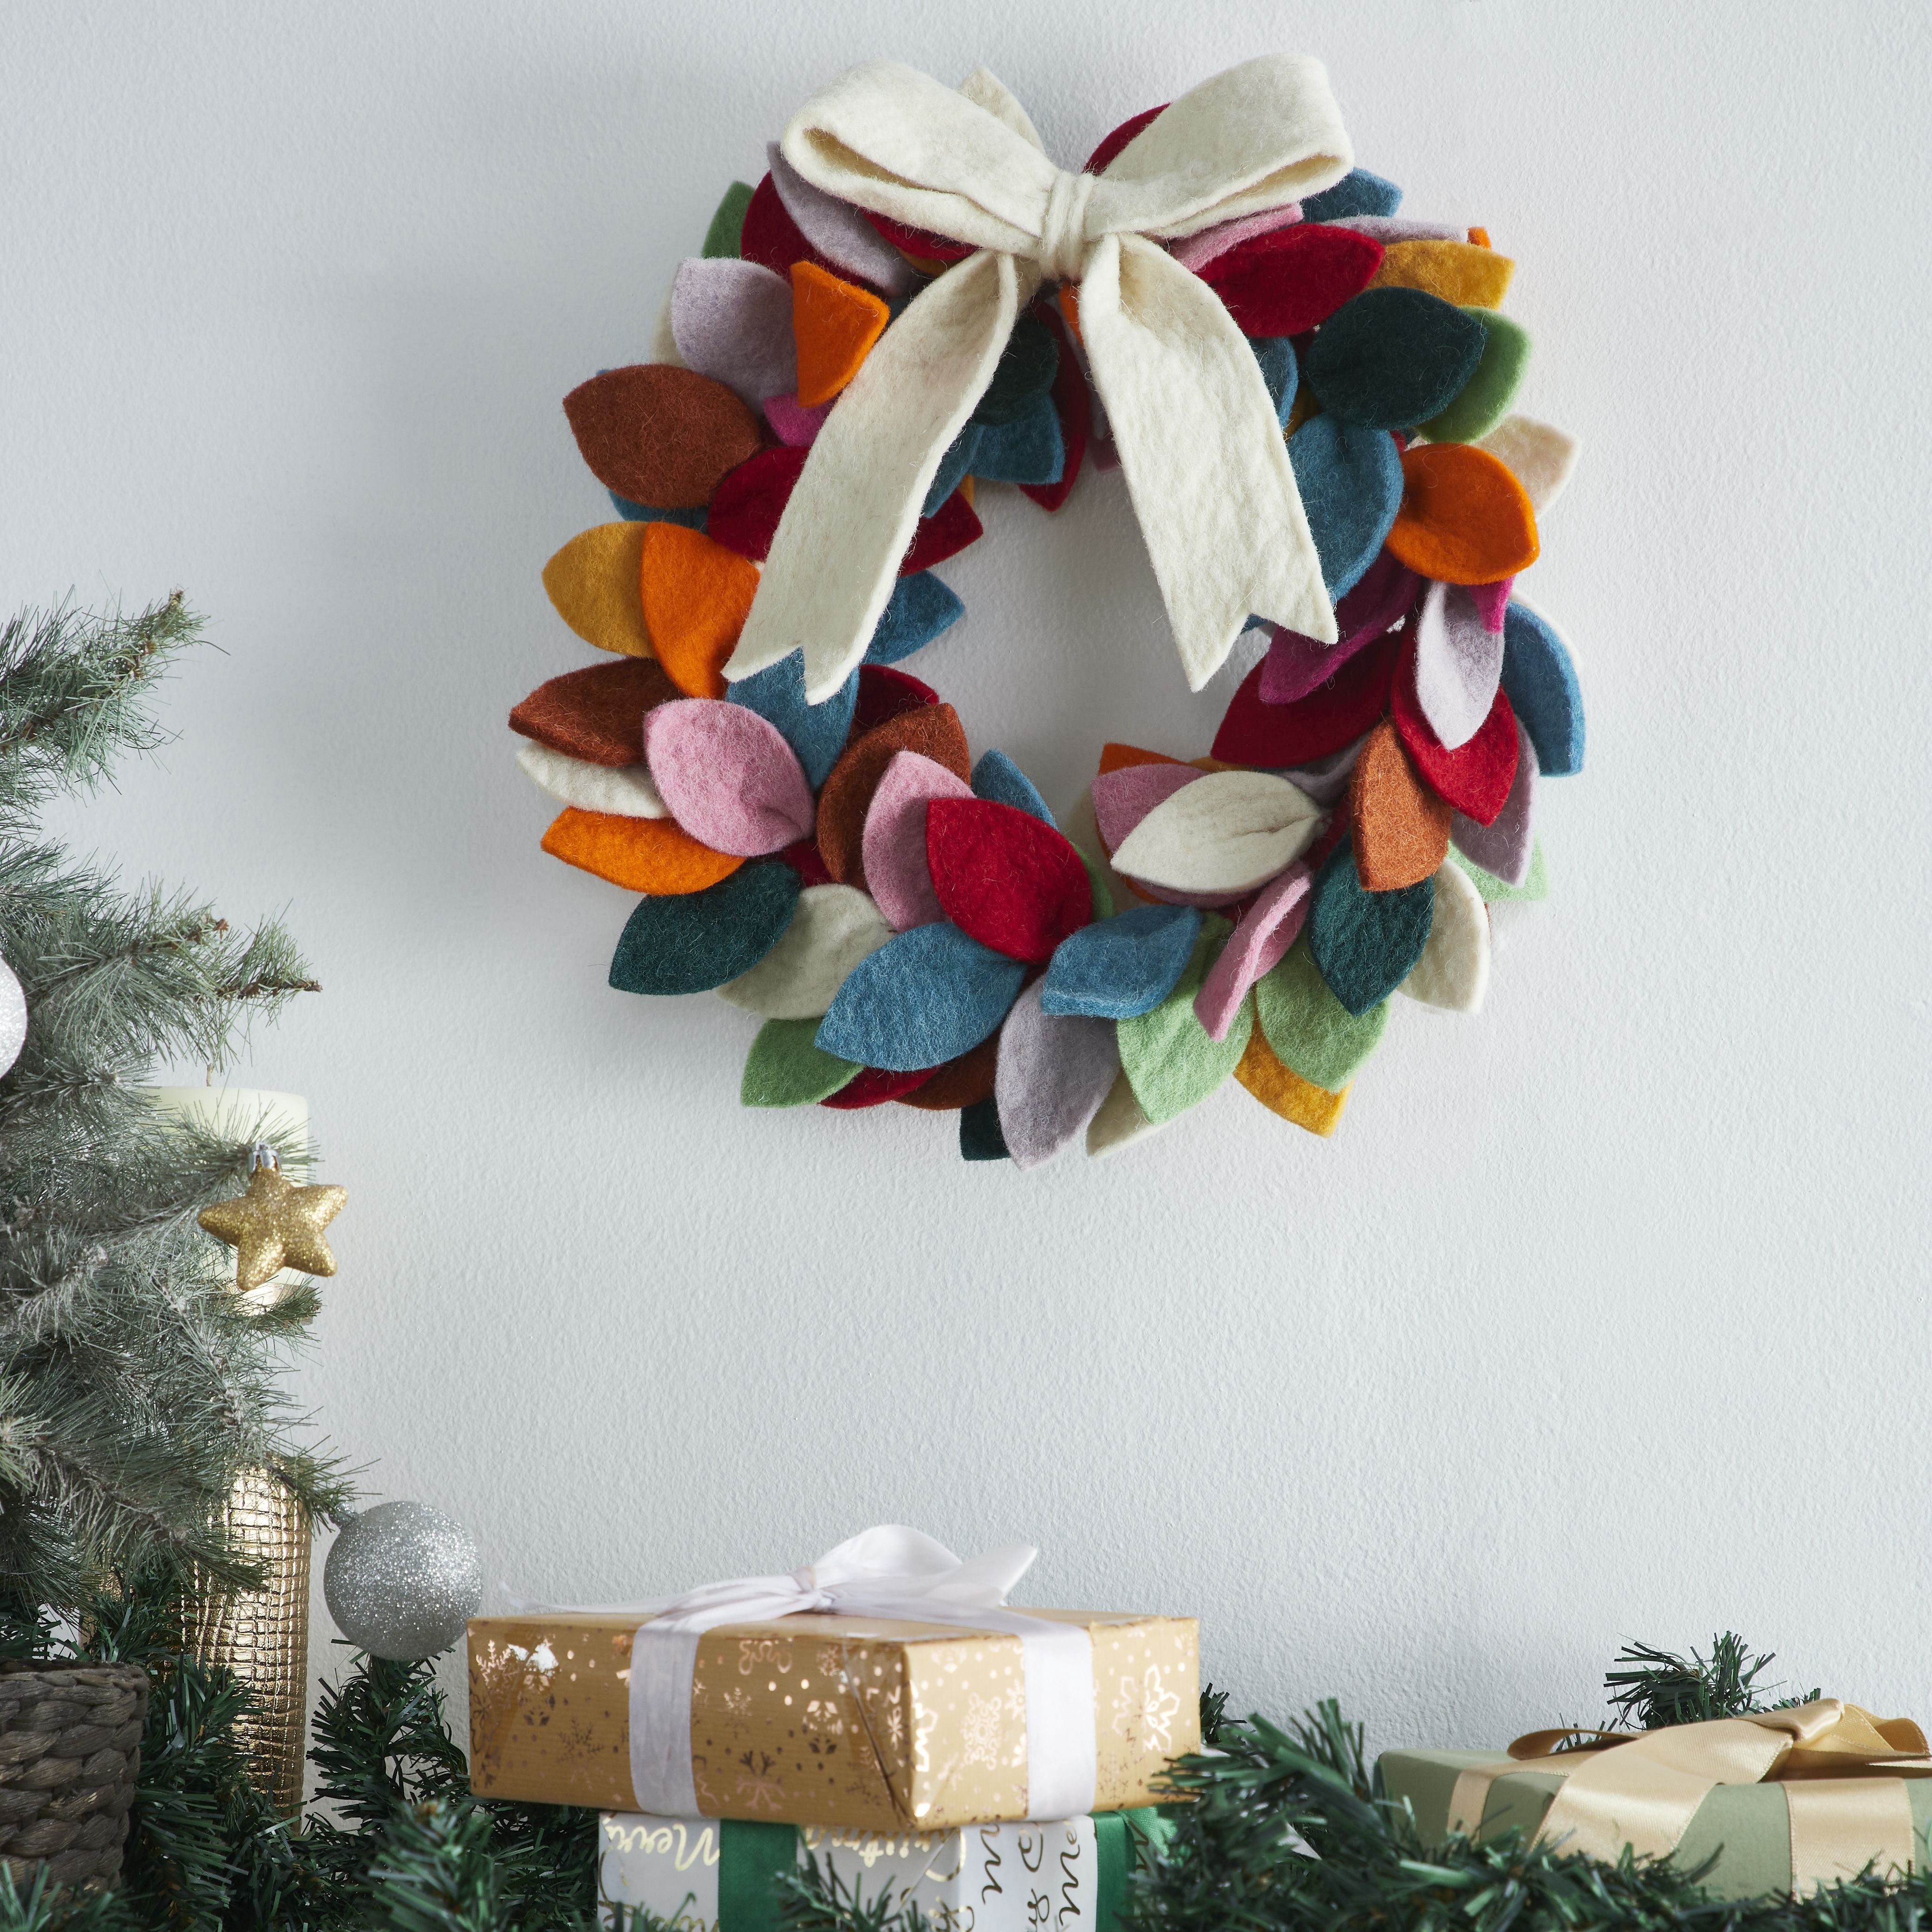 Multicolored Wreath With Cream Bow On Top Made Of Hand Felted Wool-12"